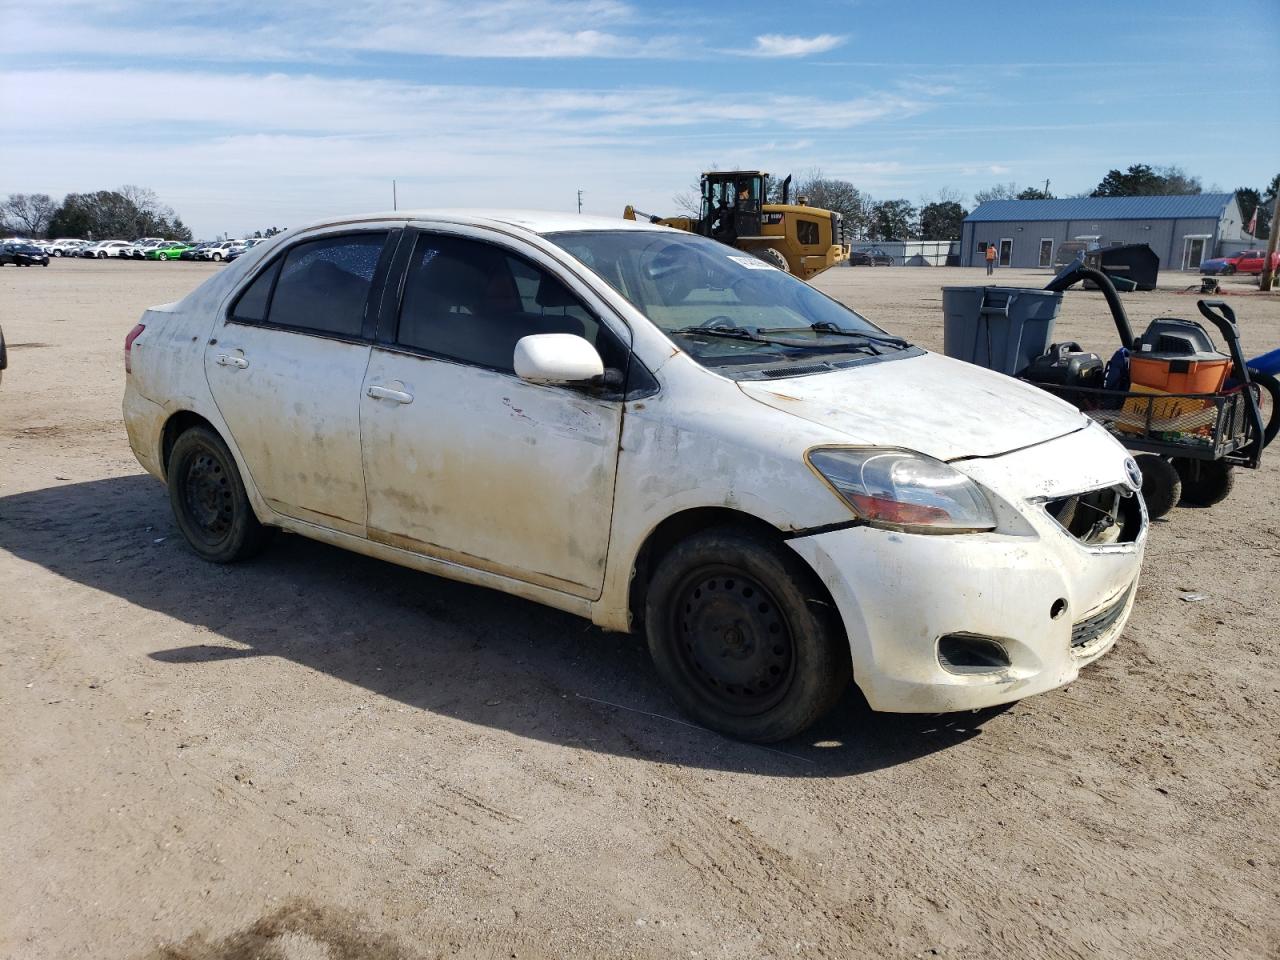 JTDBT923171****** Salvage and Wrecked 2007 Toyota Yaris in Alabama State